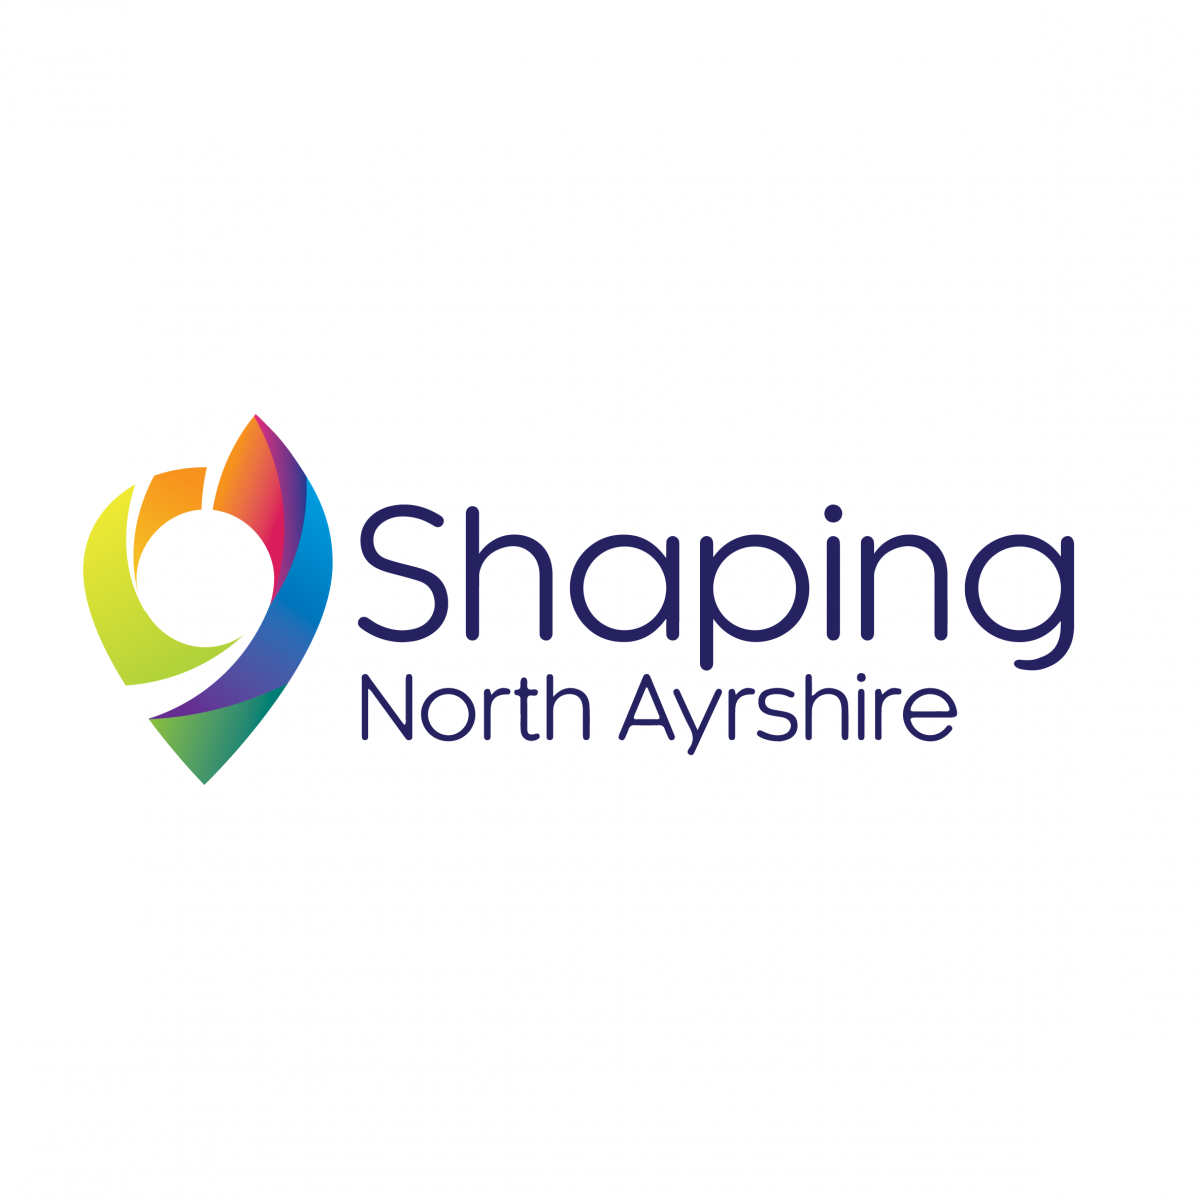 Vote in the Shaping North Ayrshire PB